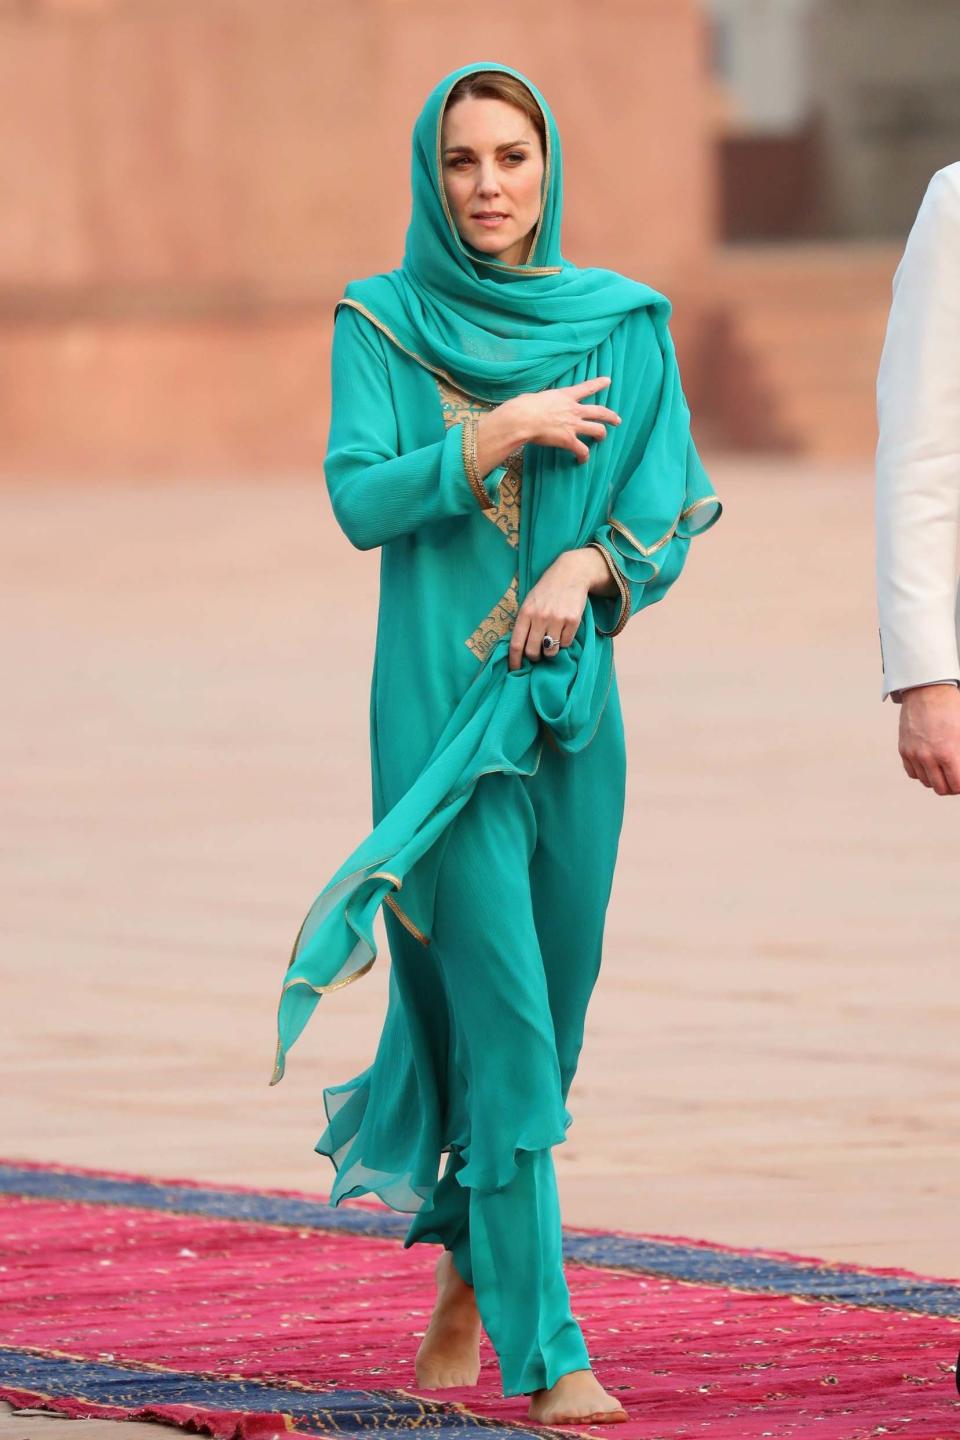 The Duchess of Cambridge at the Badshahi Mosque in Lahore (Getty Images)